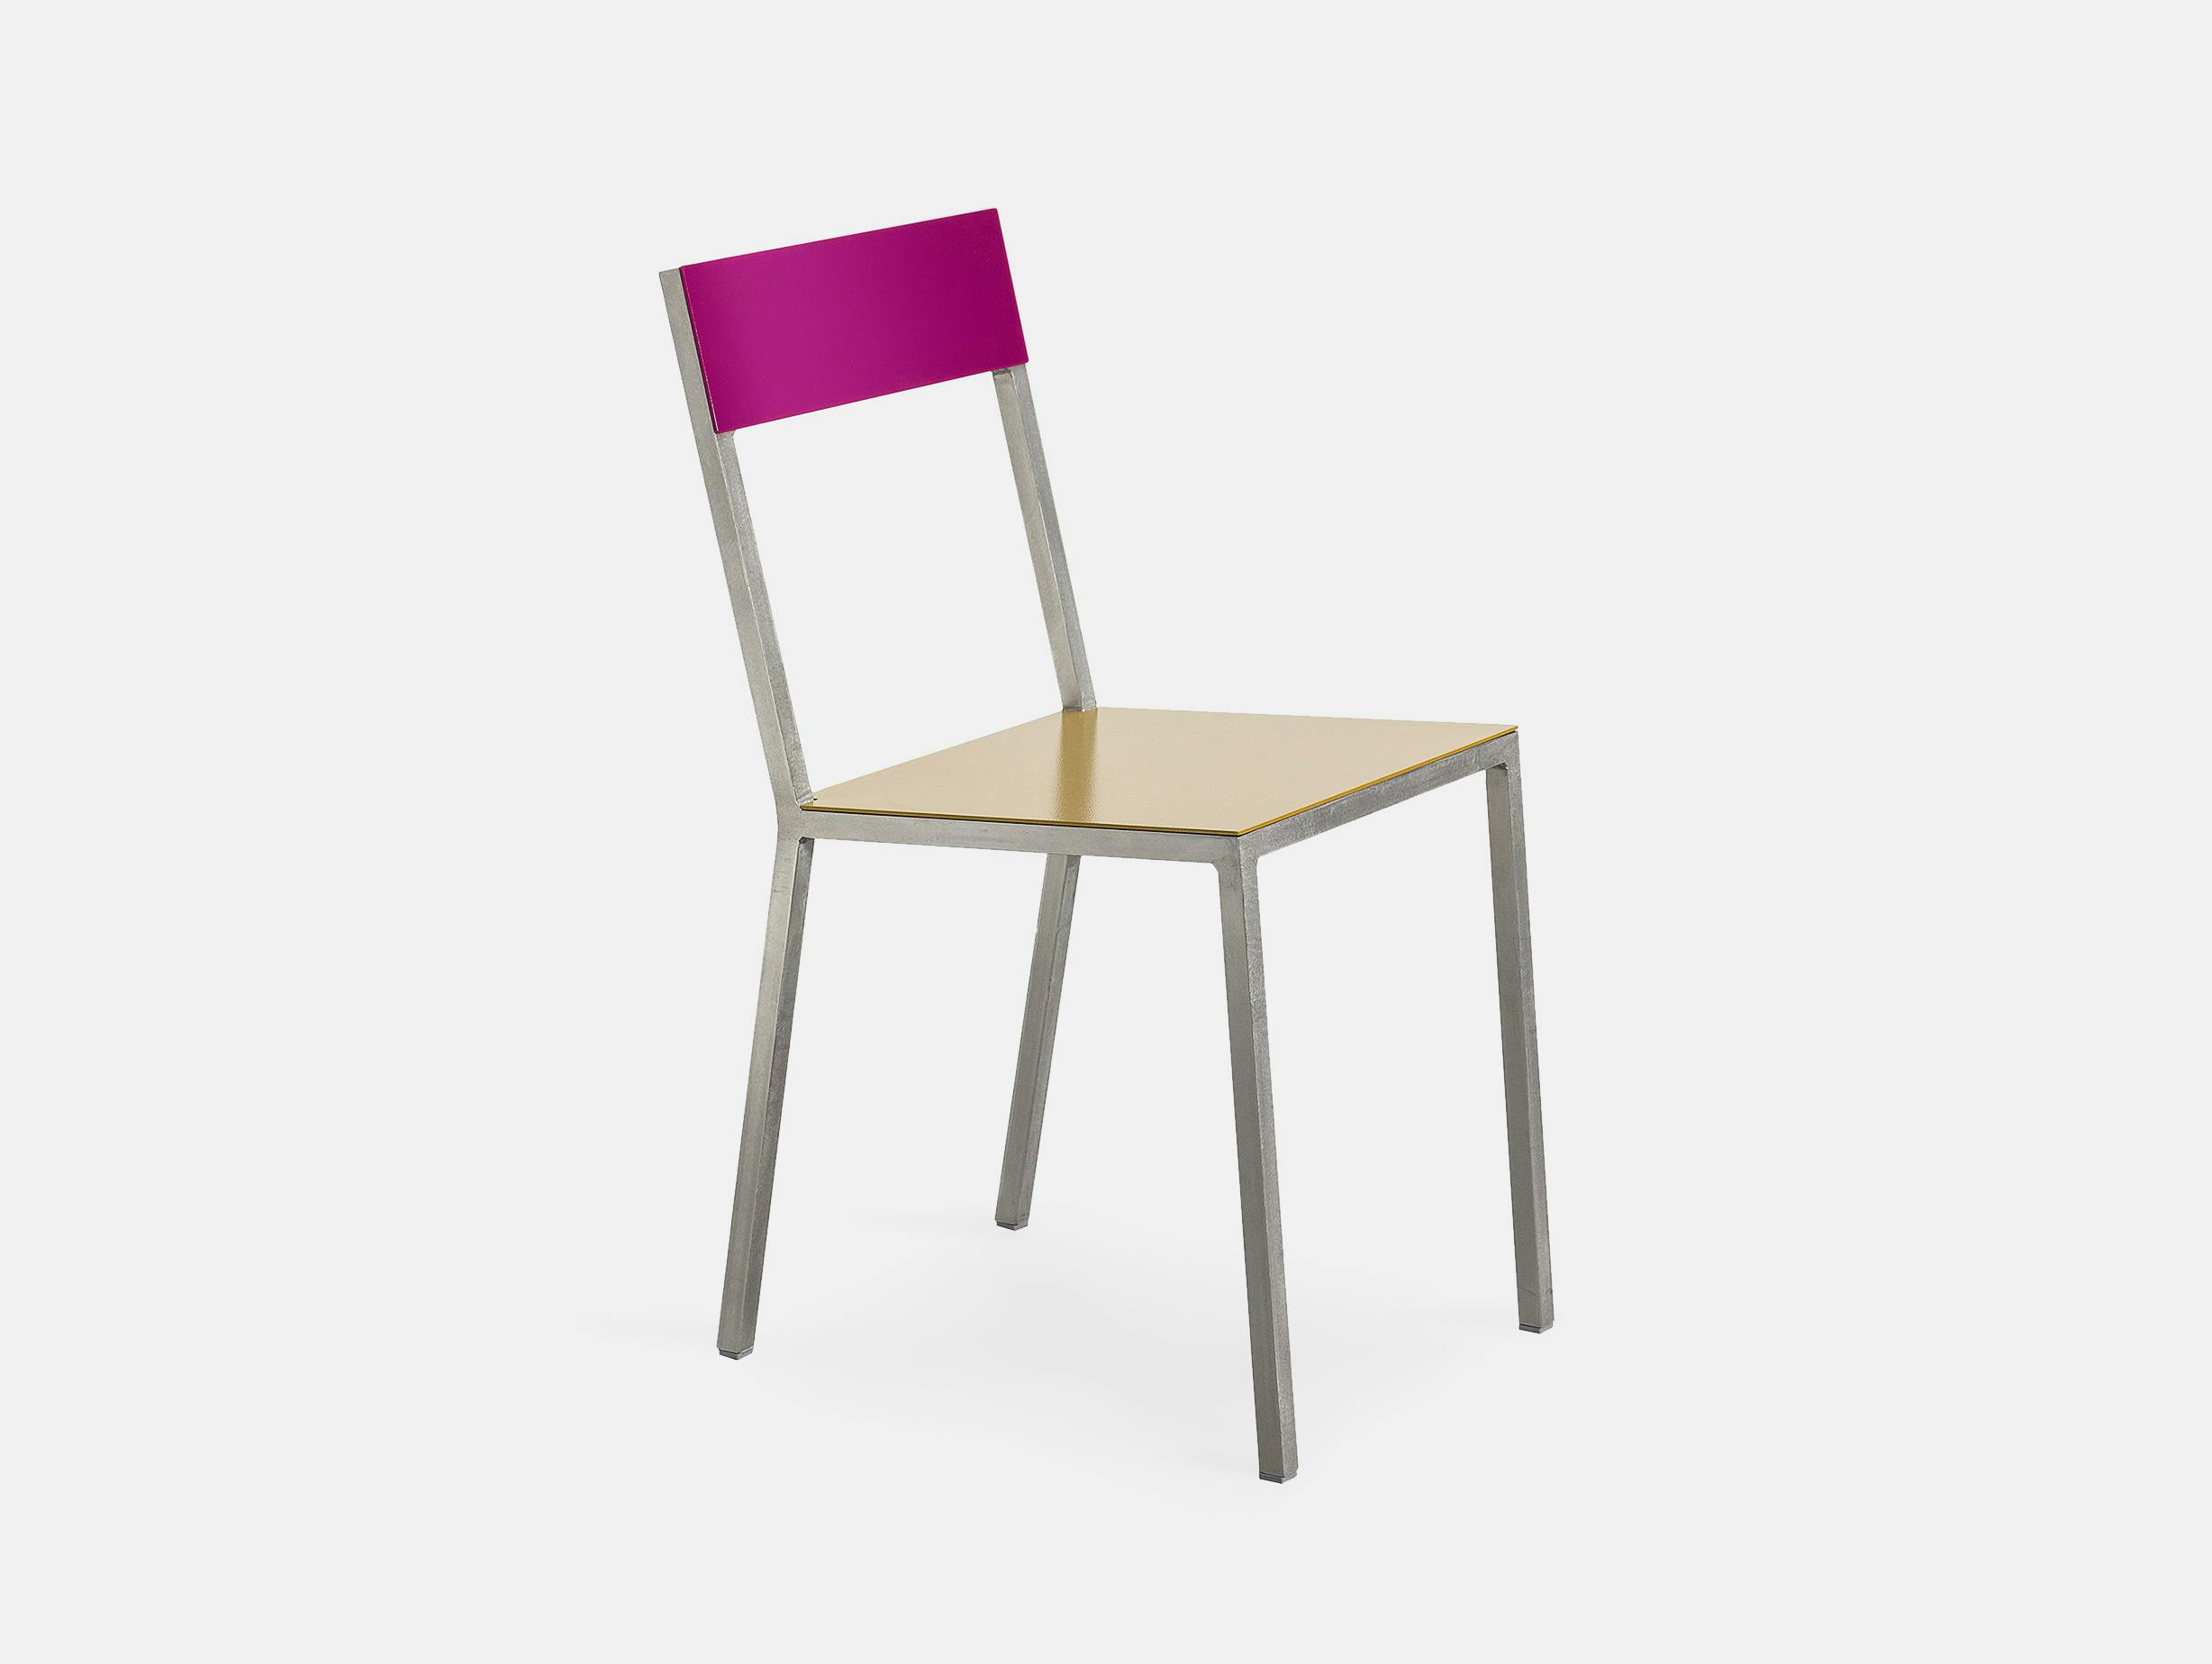 Muller Van Severen Alu Chair Valerie Objects candy purple curry